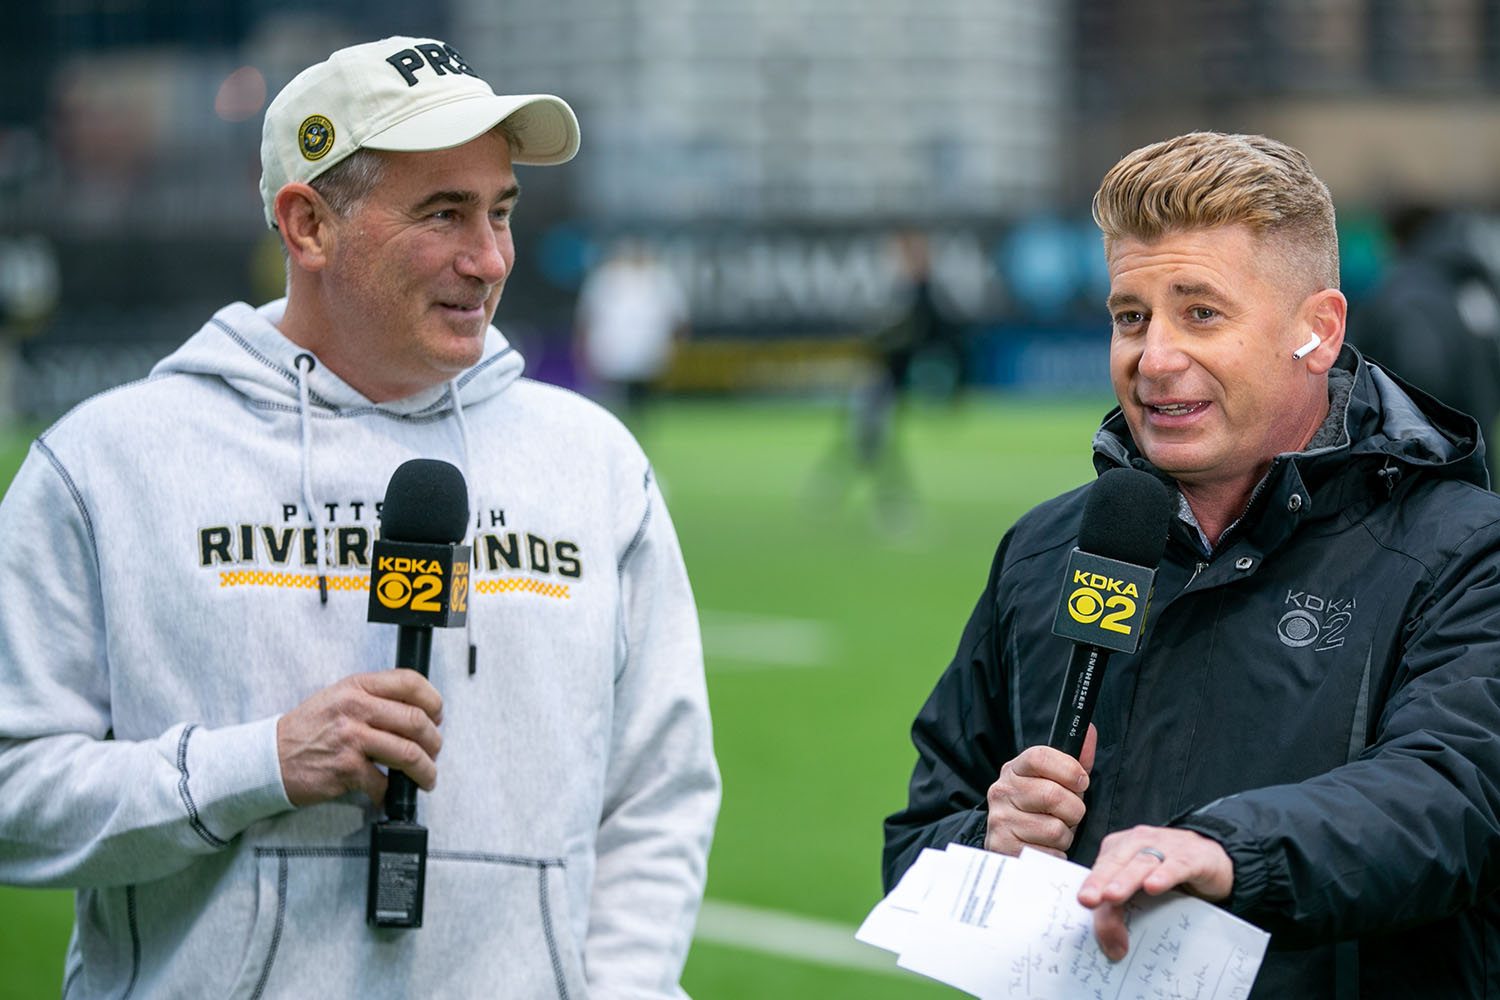 Riverhounds owner Tuffy Shallenberger speaks on the field with KDKA-TV sports anchor Rich Walsh before the 2023 season opener at Highmark Stadium.